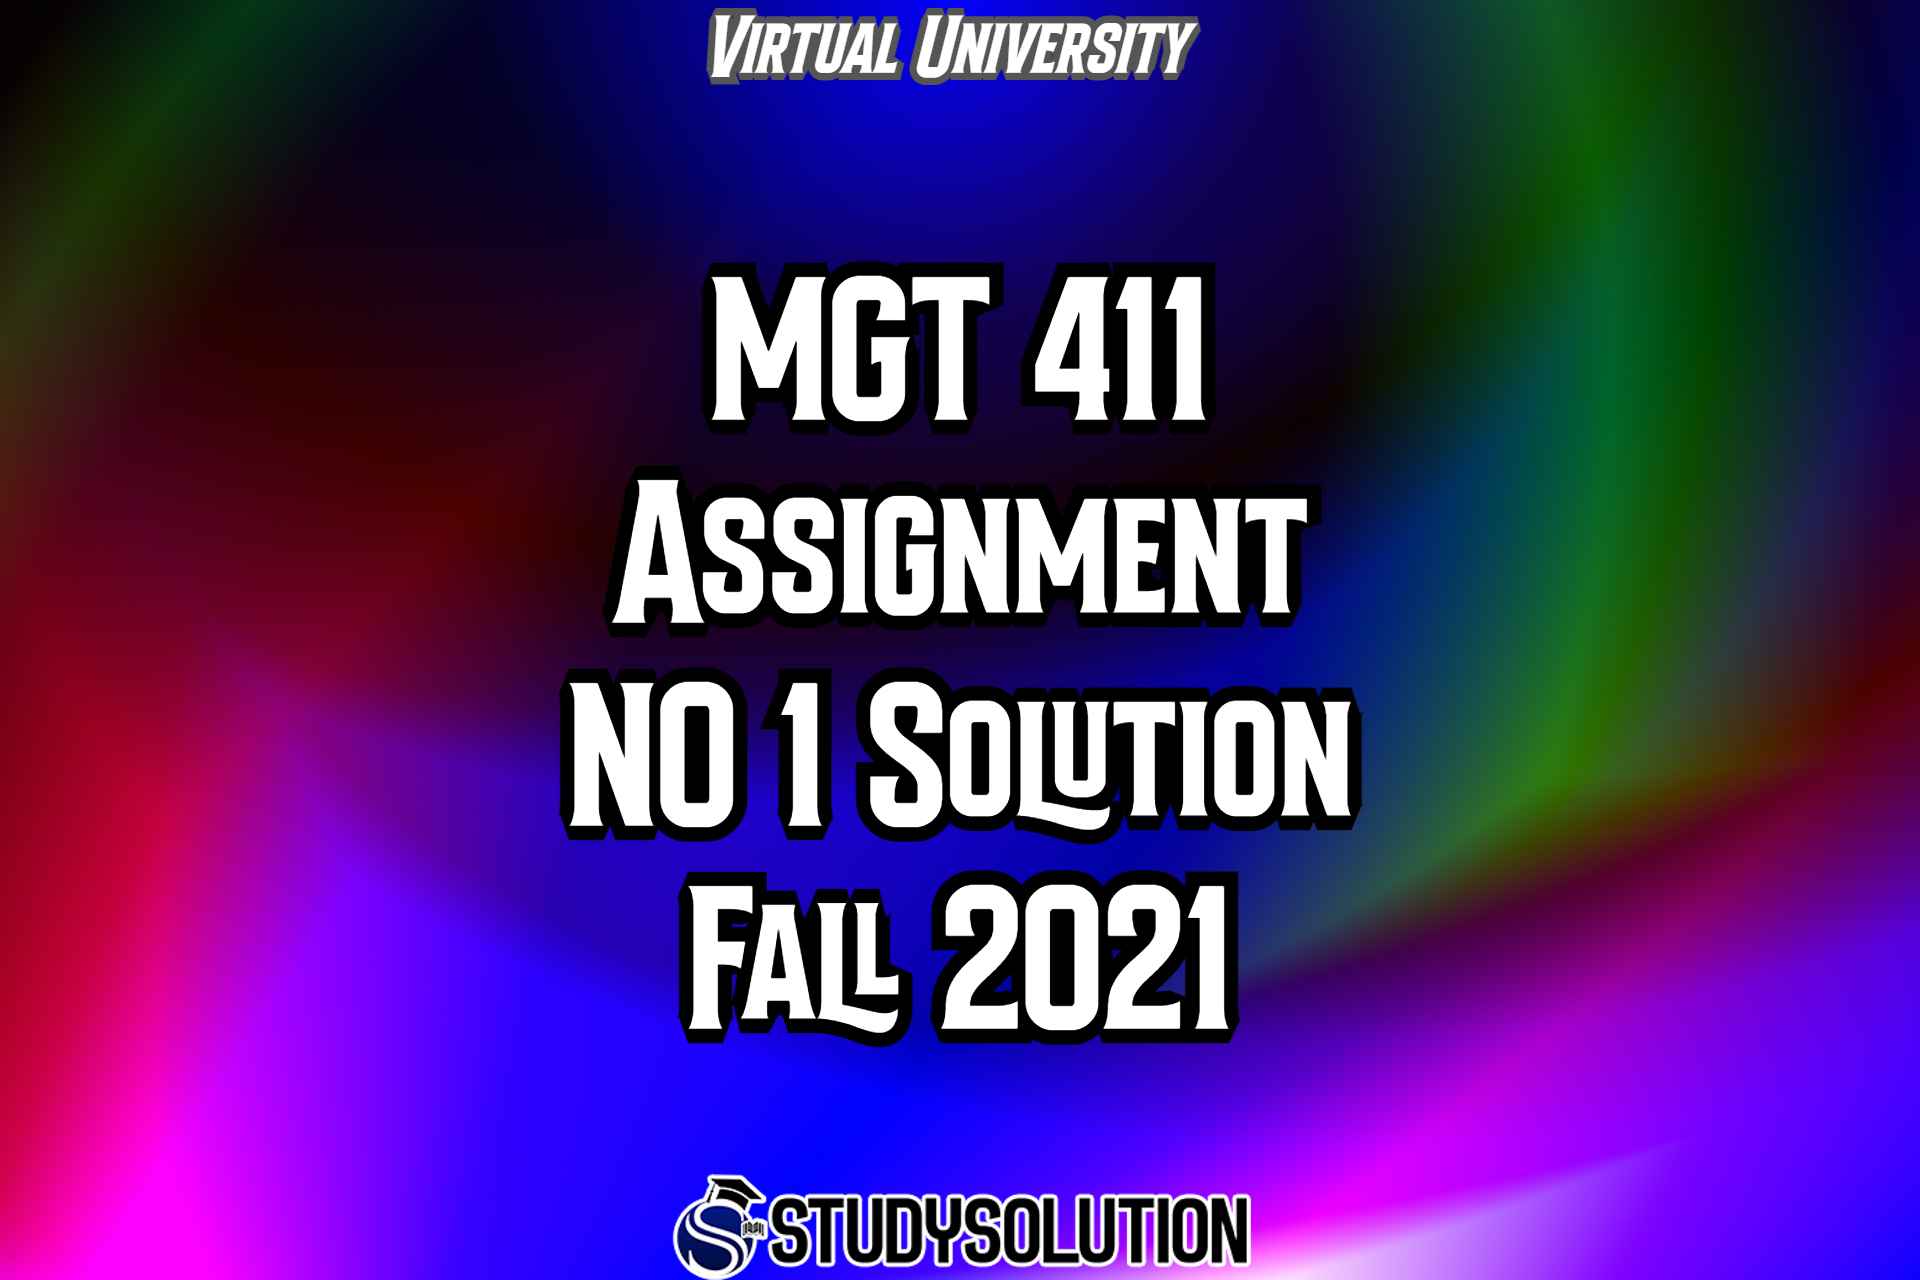 MGT411 Assignment No 1 Solution Fall 2021